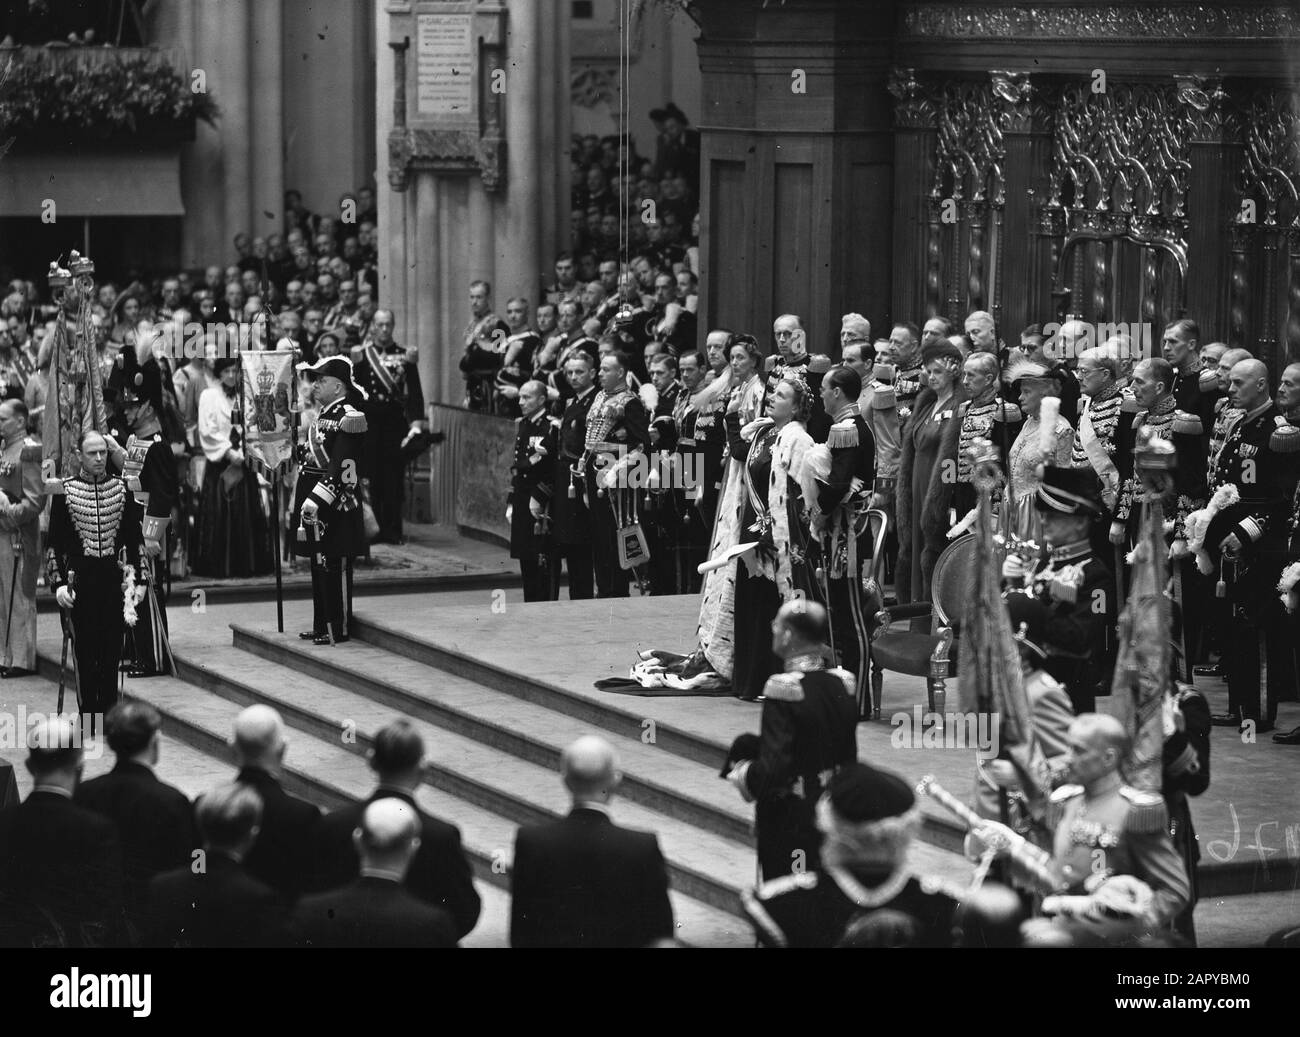 abdication Queen Wilhelmina/Inauguration of Queen Juliana  Inauguration Queen Juliana. Solemnity at the Nieuwe Kerk in Amsterdam (order No 8-17). Debation of oath by Queen Juliana, as provided for in Article 53 of the Dutch Constitution, ending with the words: So truly help me God almighty! Date: 6 September 1948 Location: Amsterdam, Noord-Holland Keywords: inaugurations, royal house Personal name: Juliana, queen Stock Photo